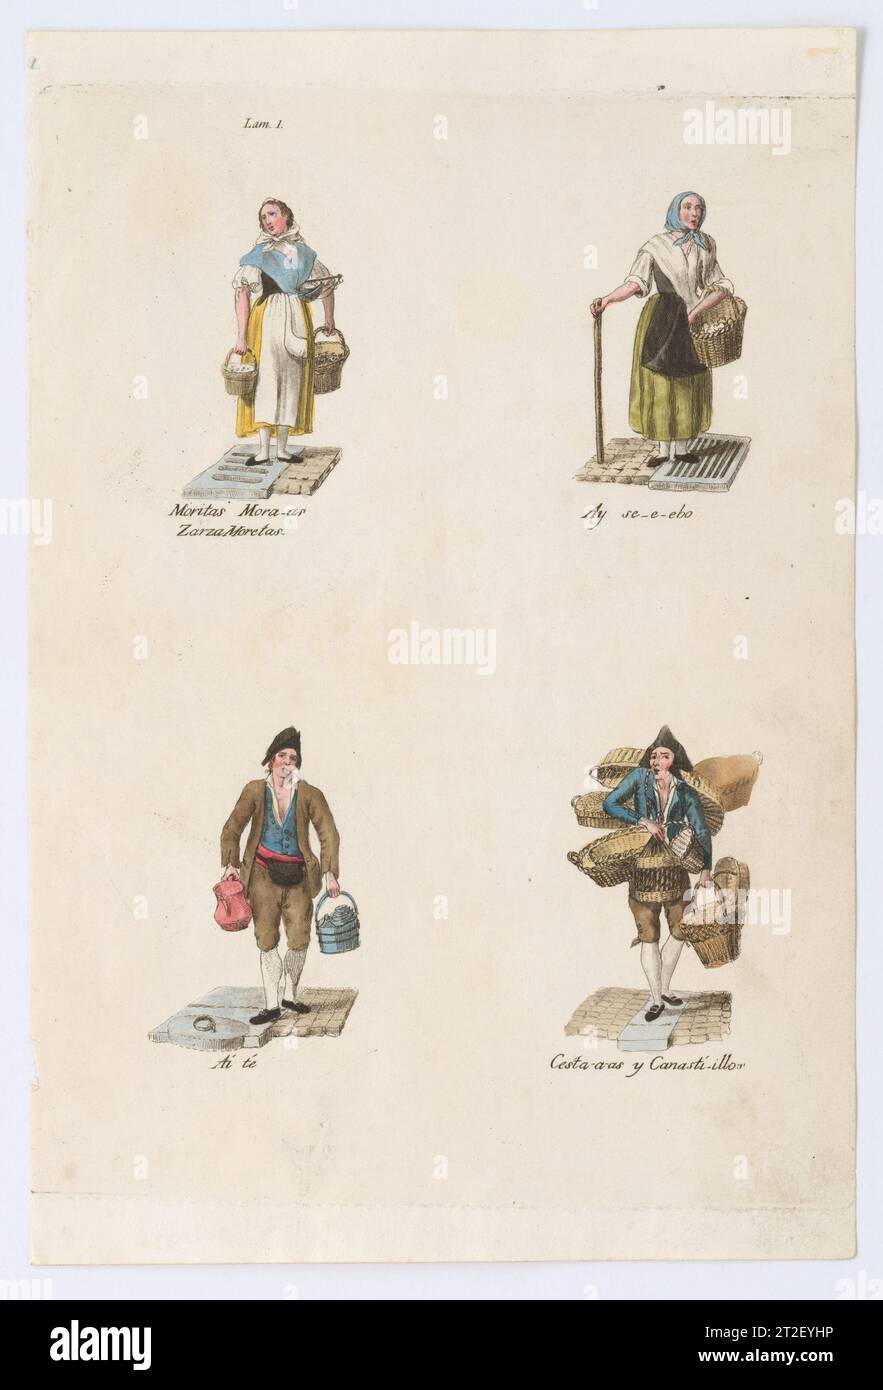 Plate 1: four street vendors from Madrid selling blueberries, onions, tea, and baskets, from 'Los Gritos de Madrid' (The Cries of Madrid) Miguel Gamborino Spanish Publisher Imprenta Real, Madrid Spanish 1809–17 The first in a group of eighteen hand-coloured engravings with a total of 72 figures representing the cries (trades/street vendors) of Madrid. Their occupations are many, and include everything from fish mongers, fruit and sweet vendors to those selling household items (chairs, pots, matts etc). This set is the first edition before each sheet was cut into four and the figures individual Stock Photo